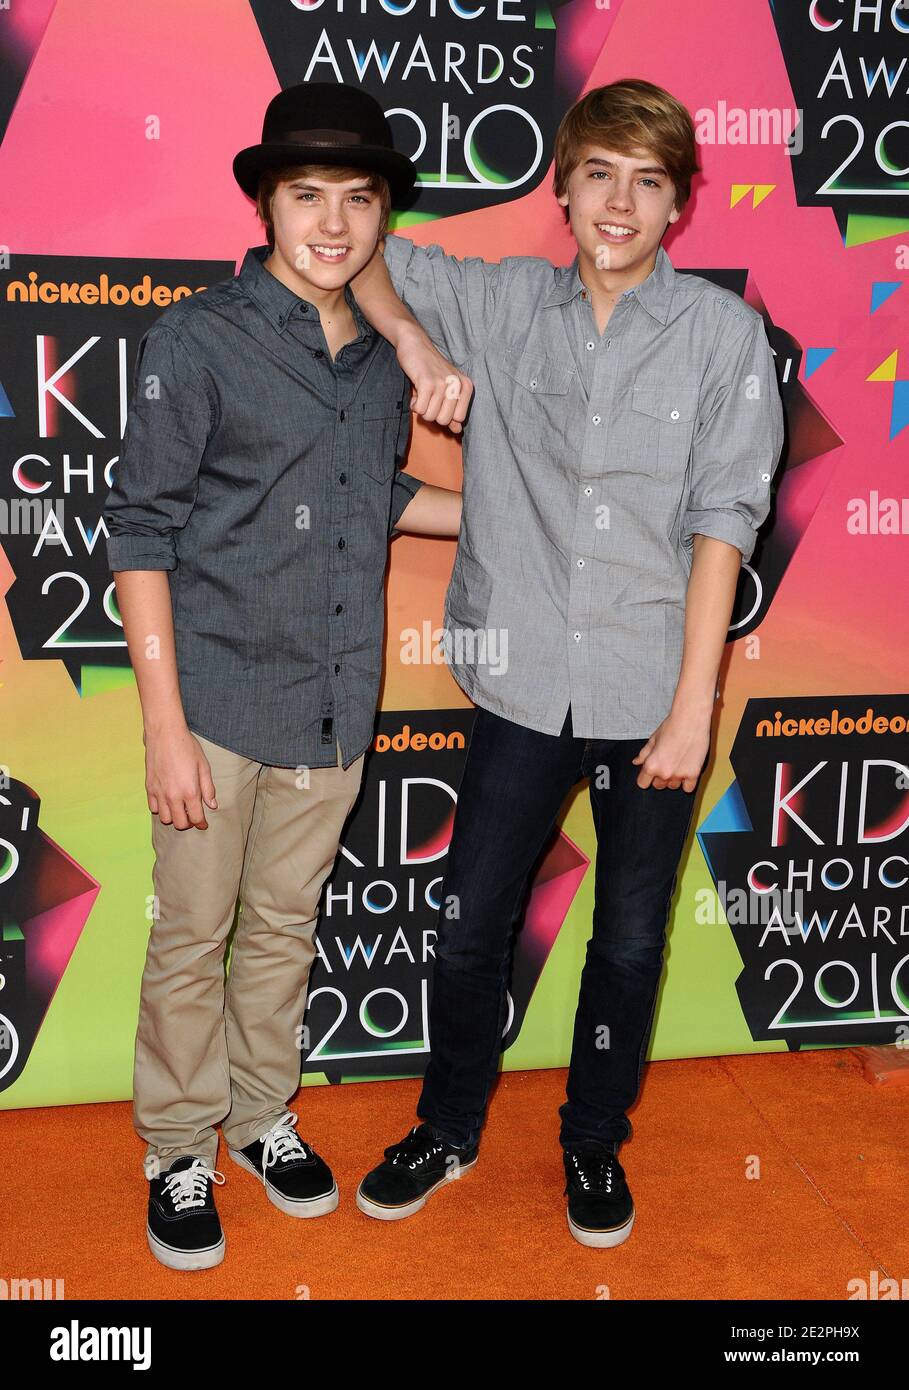 Dylan Sprouse and Cole Sprouse attend the Nickelodeon's 23rd Annual Kids' Choice Awards held at UCLA's Pauley Pavilion. Los Angeles, March 27, 2010. (Pictured: Dylan Sprouse, Cole Sprouse). Photo by Lionel Hahn/ABACAPRESS.COM Stock Photo